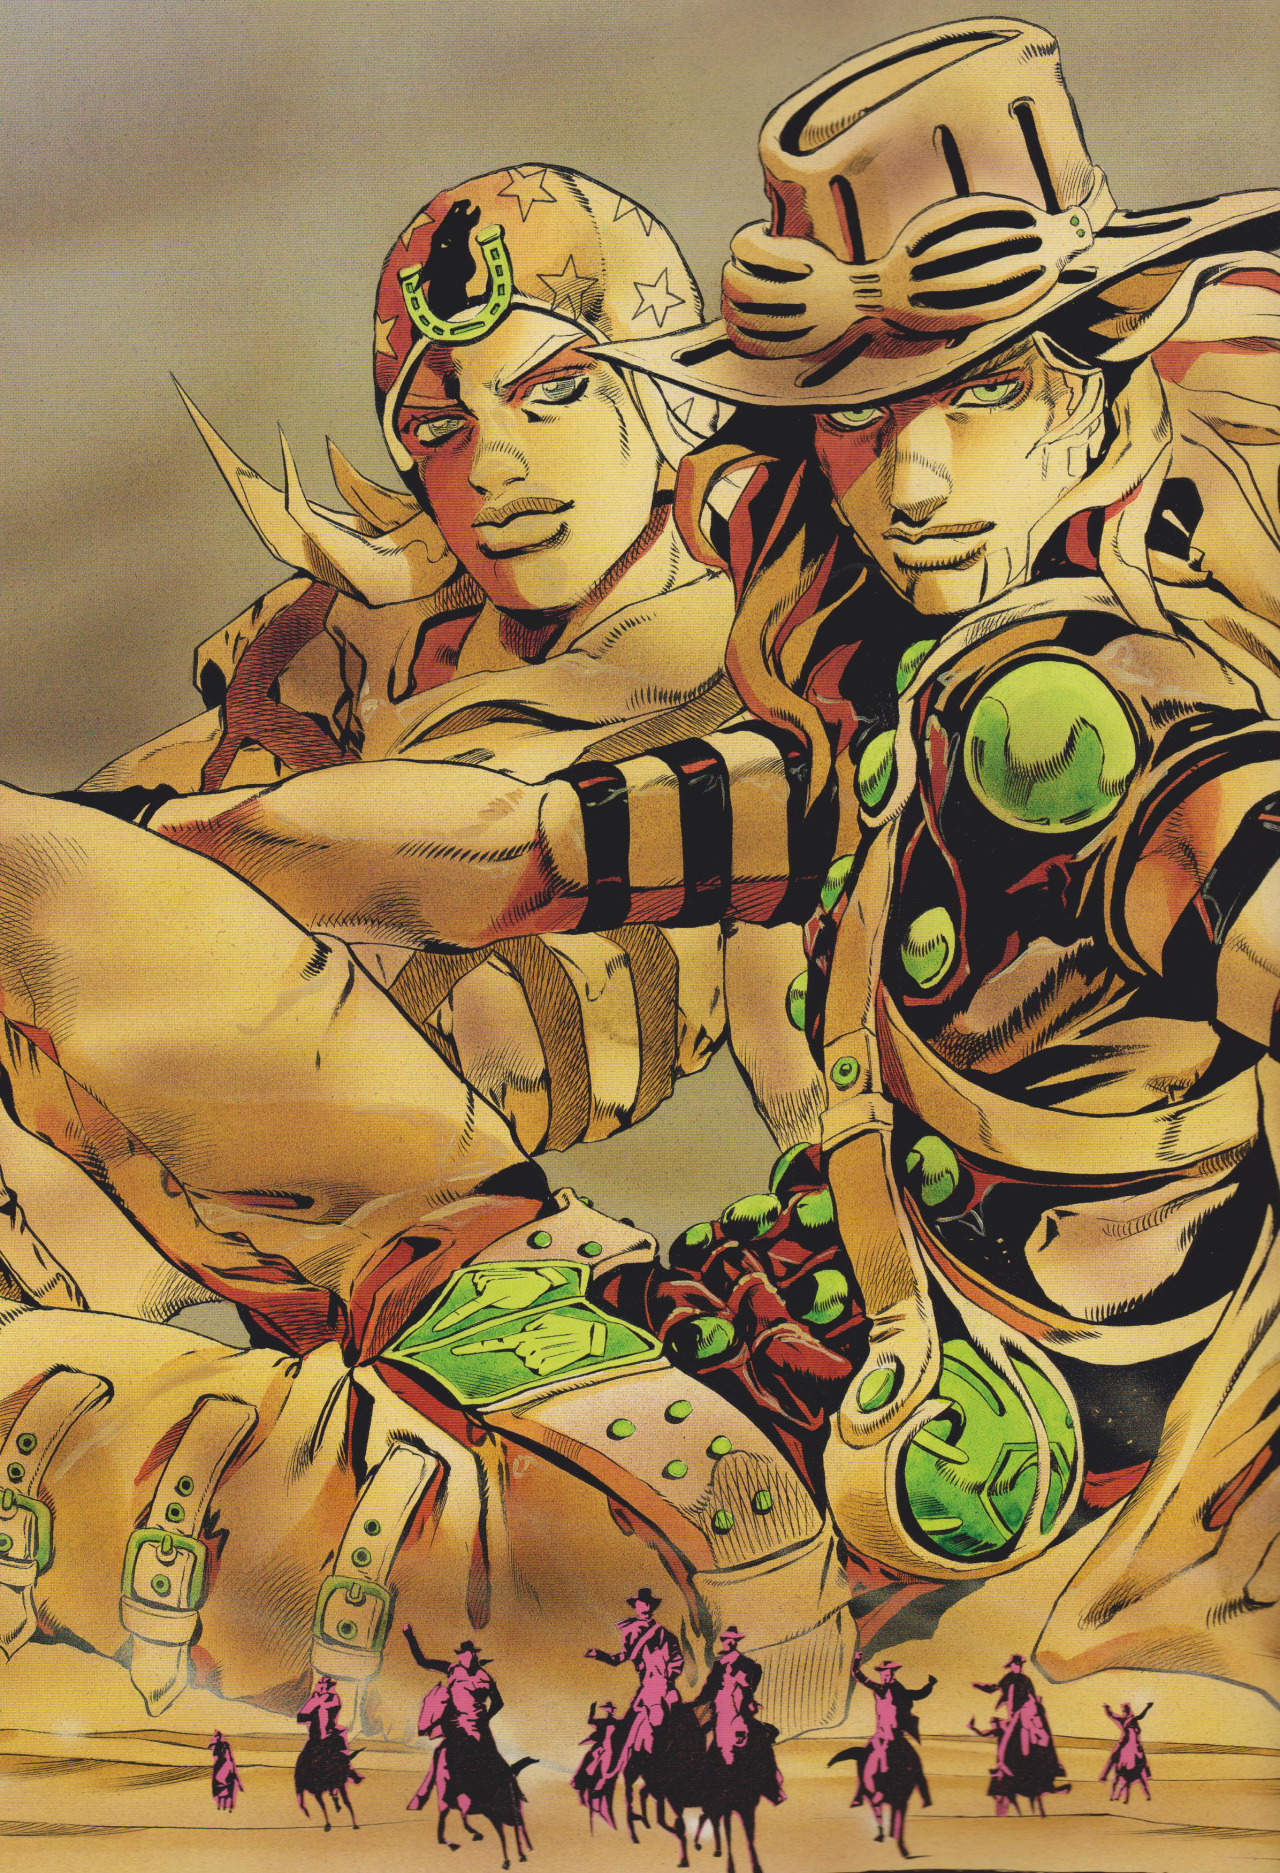 Gyro Zeppeli and Scan Gallery